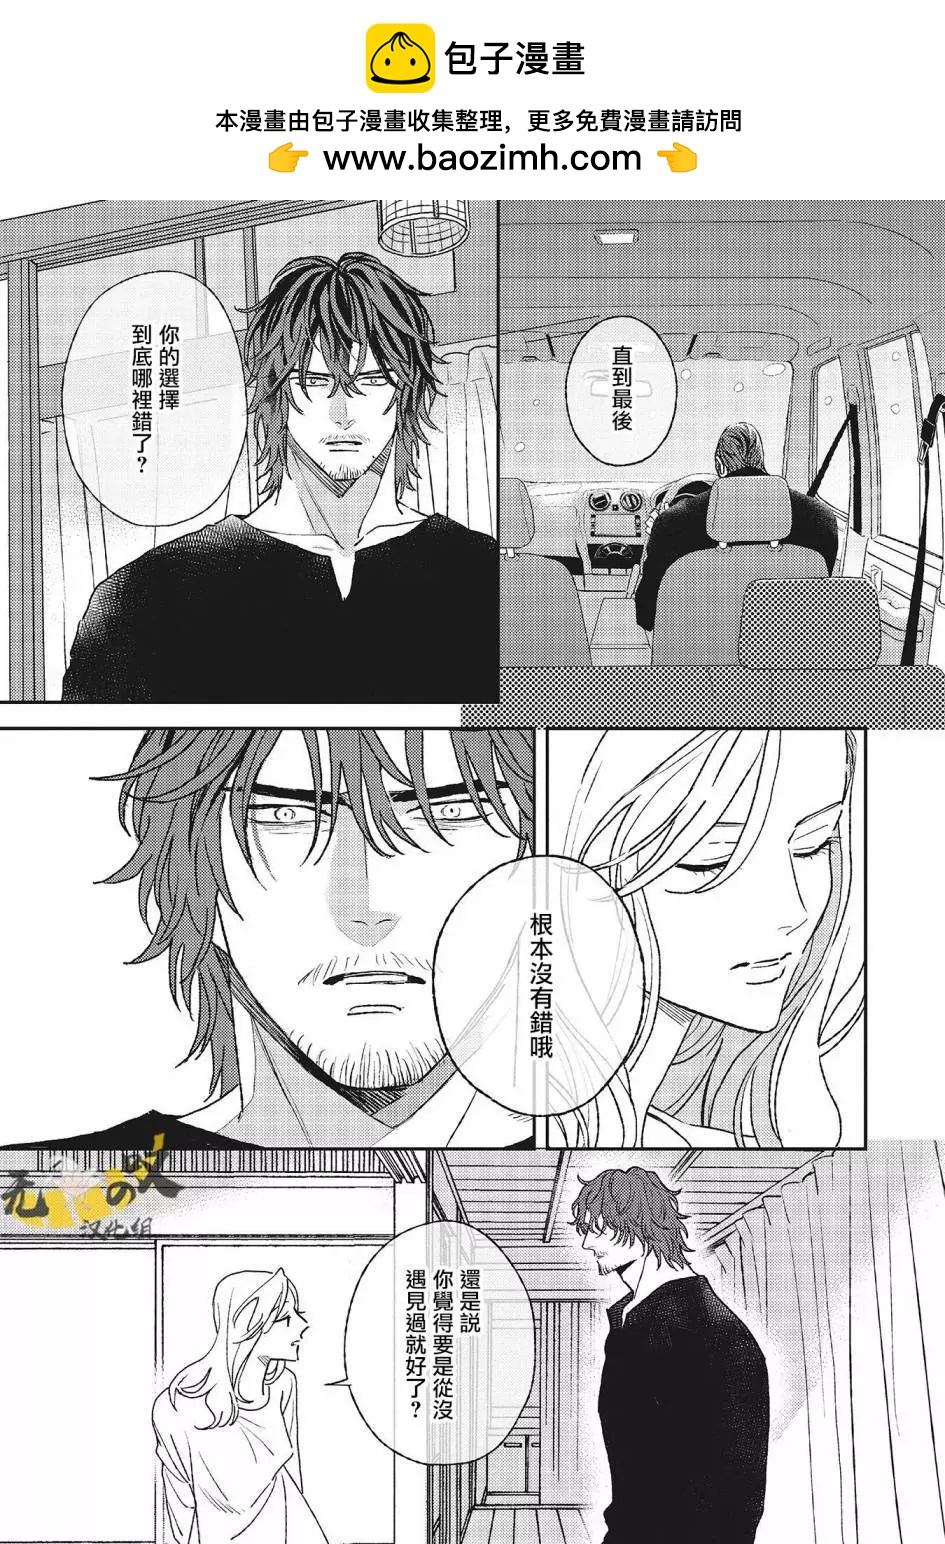 His Little Amber - 第07話 - 3